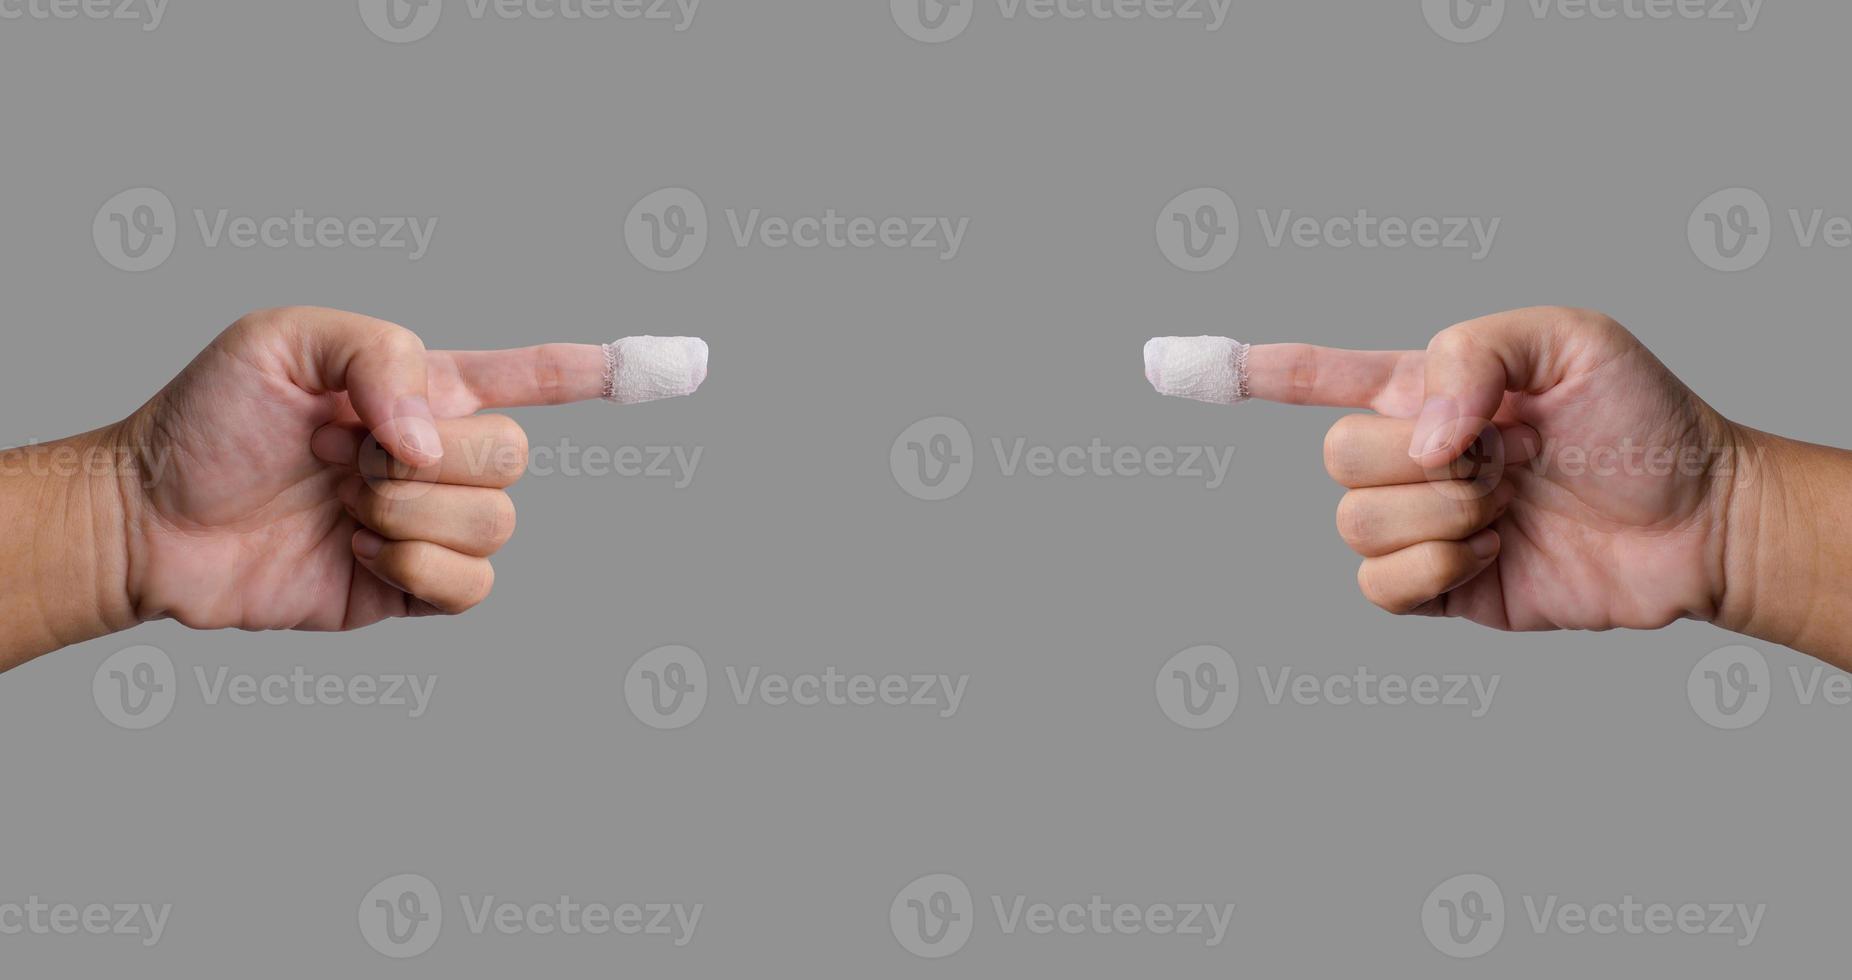 Two fingers pointing a wounded finger was treated with gauze attached To clean and prevent infection of the wound. Isolated image with gray background. Put clipping paths, copy space ready to use. photo